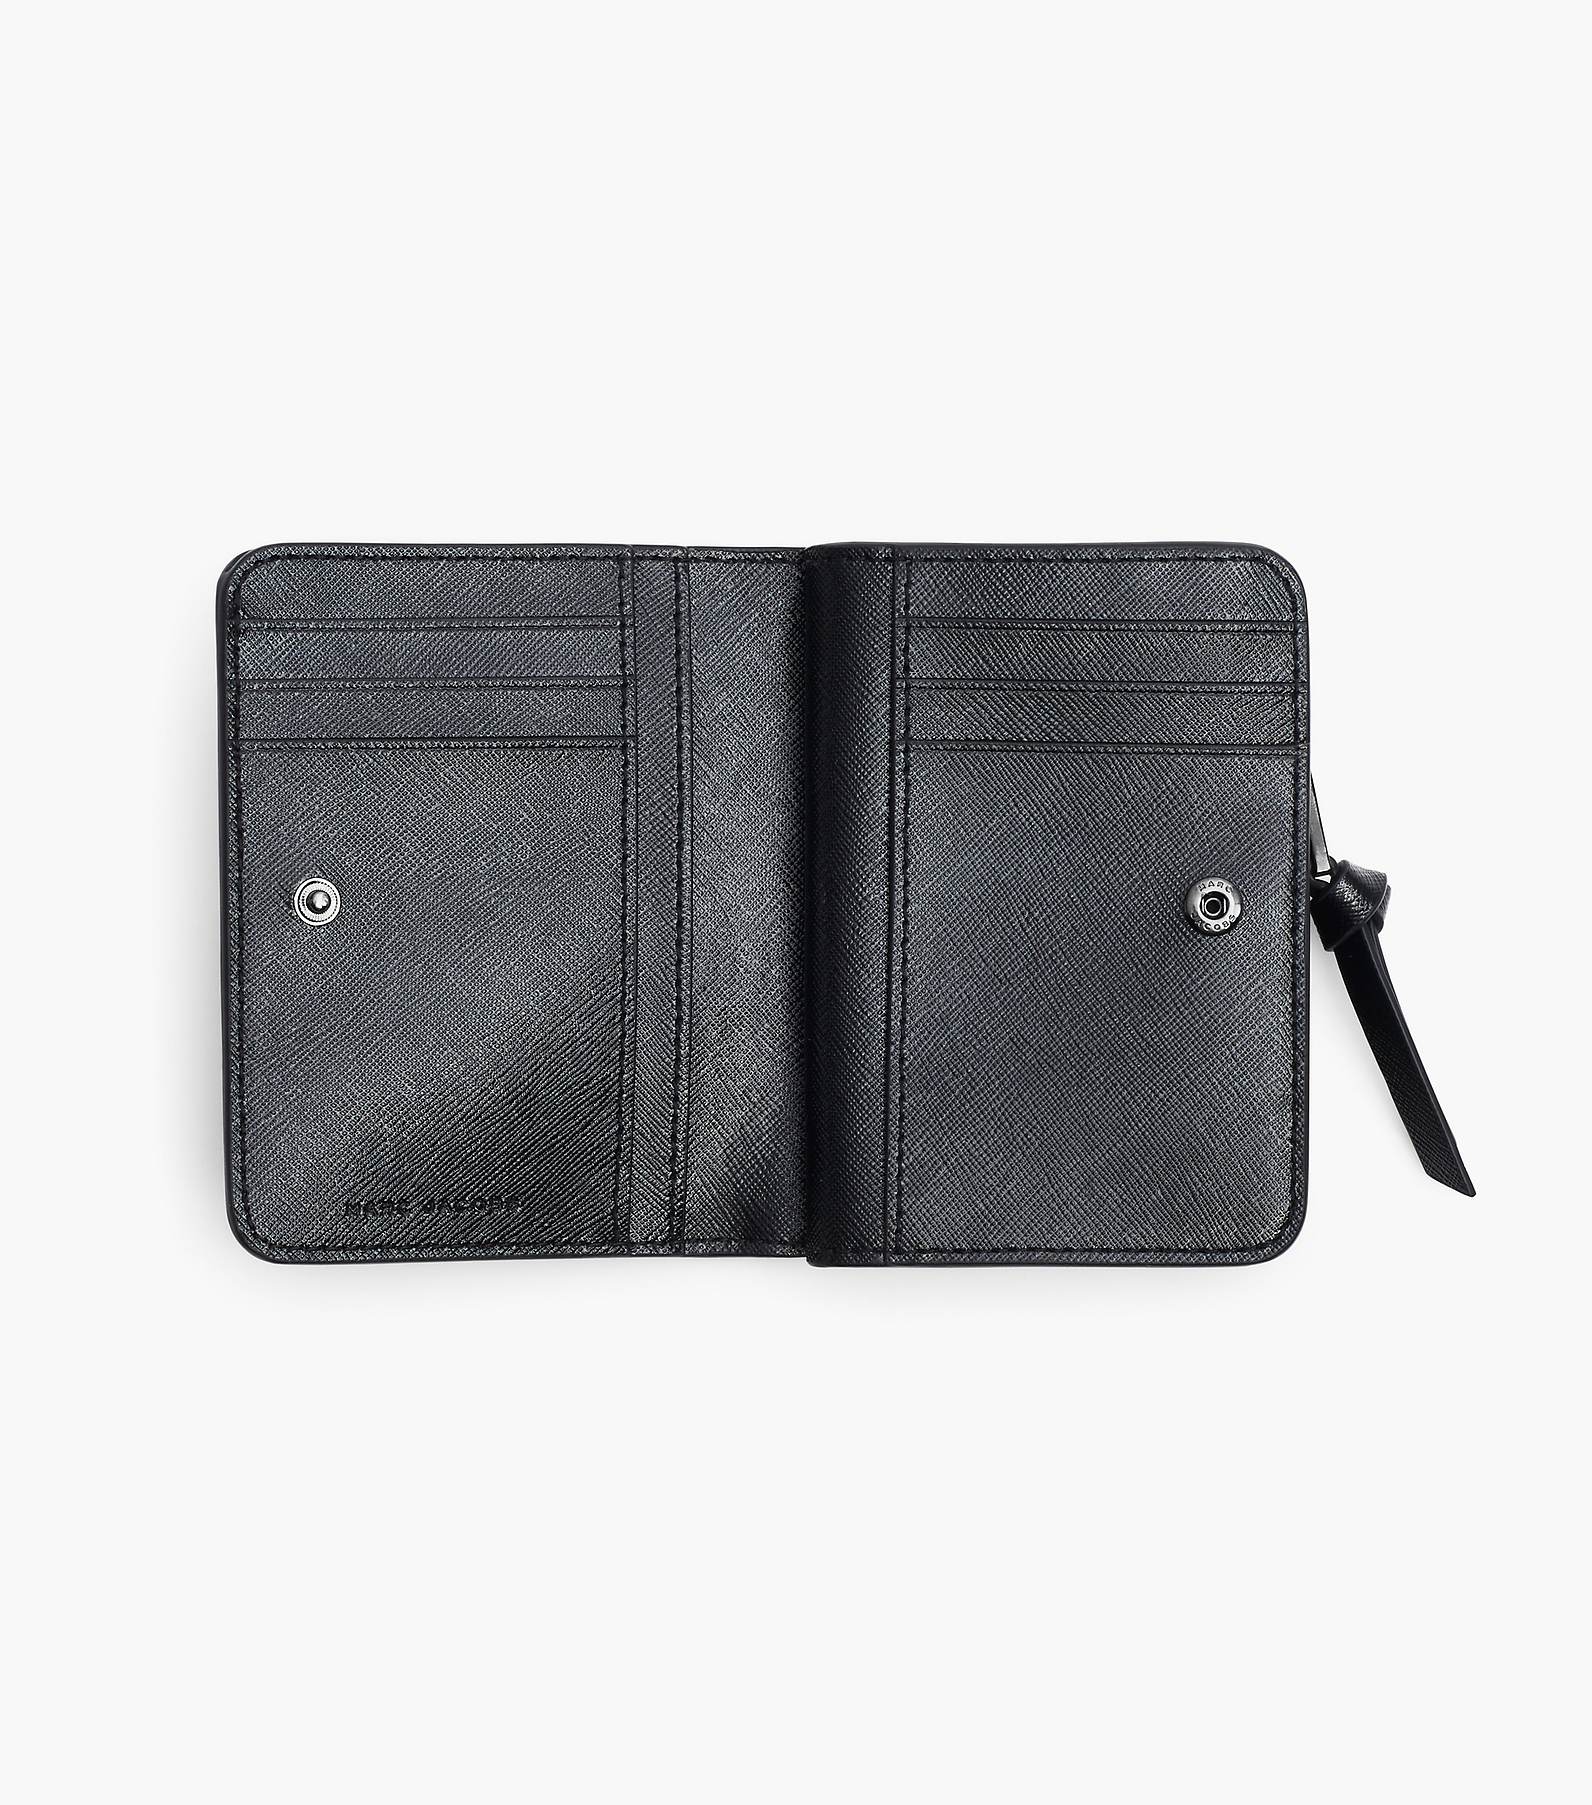 The Utility Snapshot DTM Mini Compact Wallet